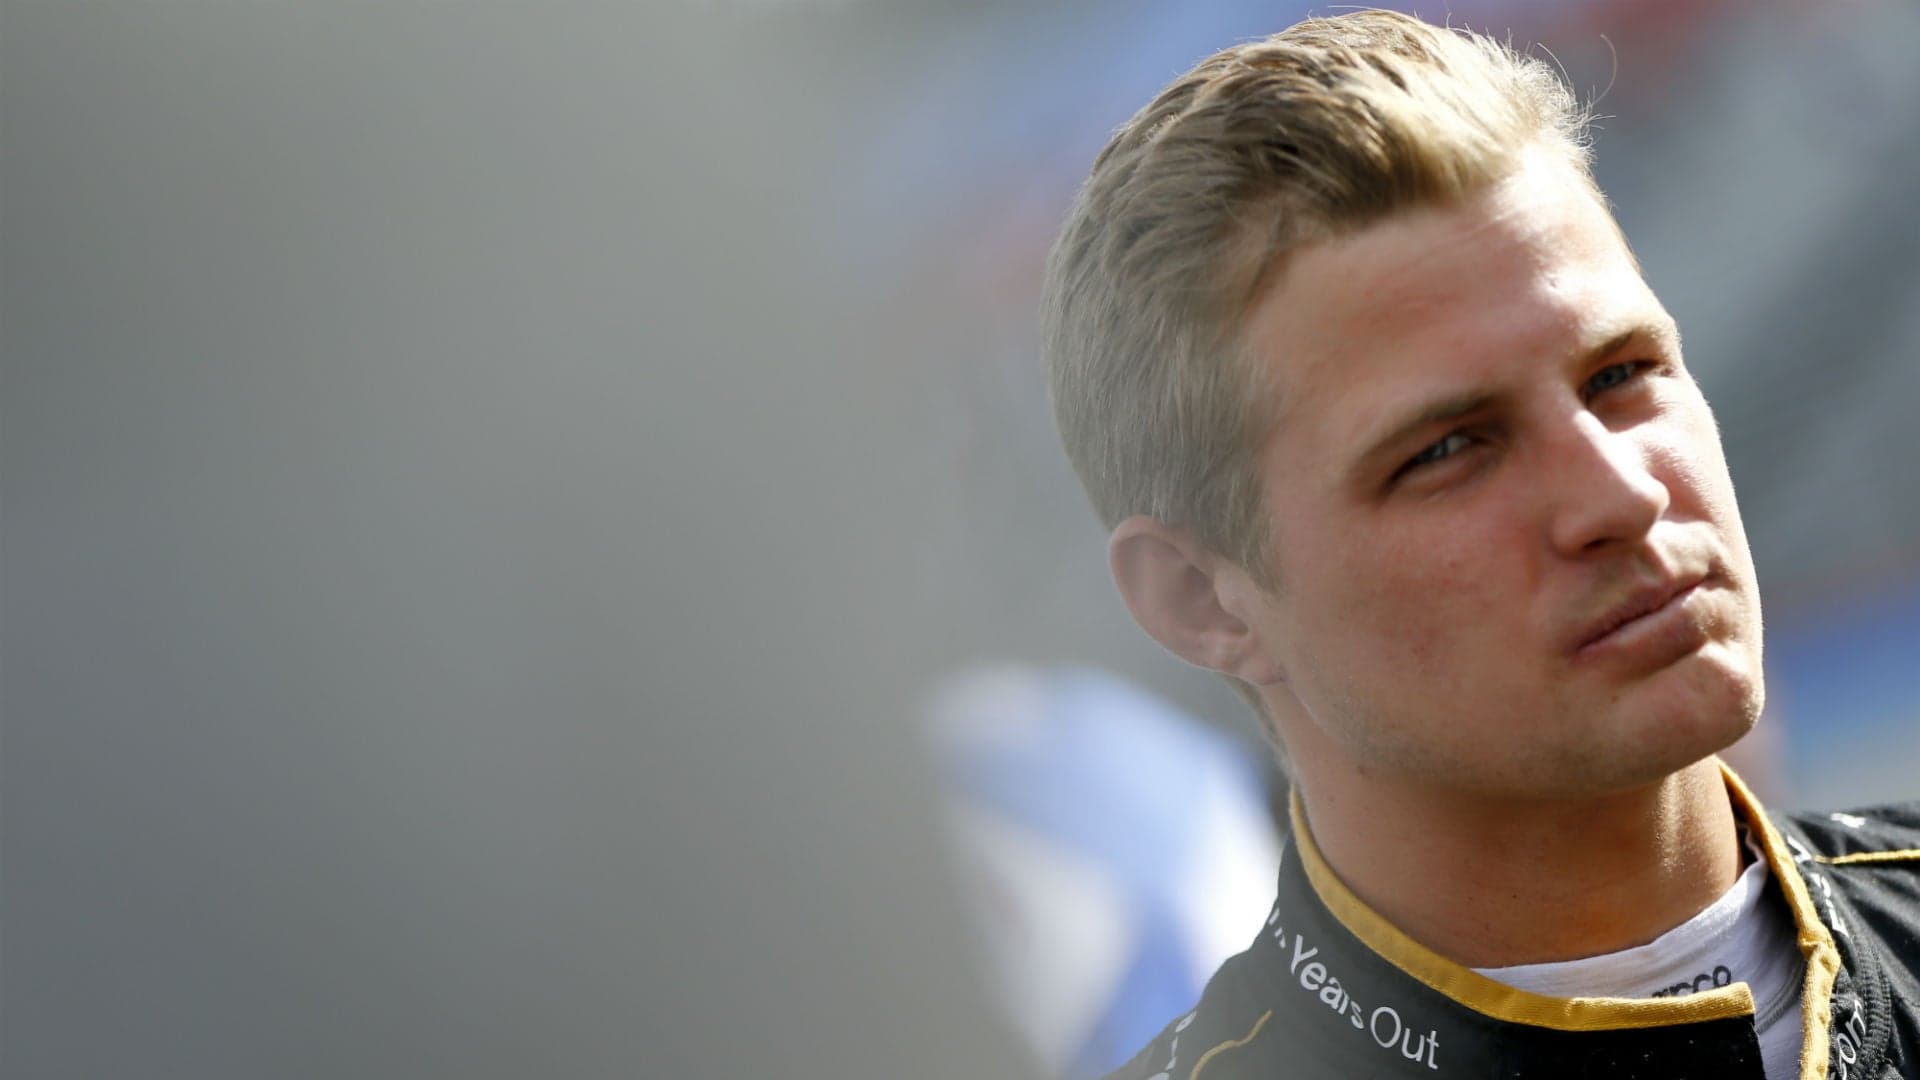 Marcus Ericsson Joins Chip Ganassi Racing in Team’s Third IndyCar Entry for 2020 Season